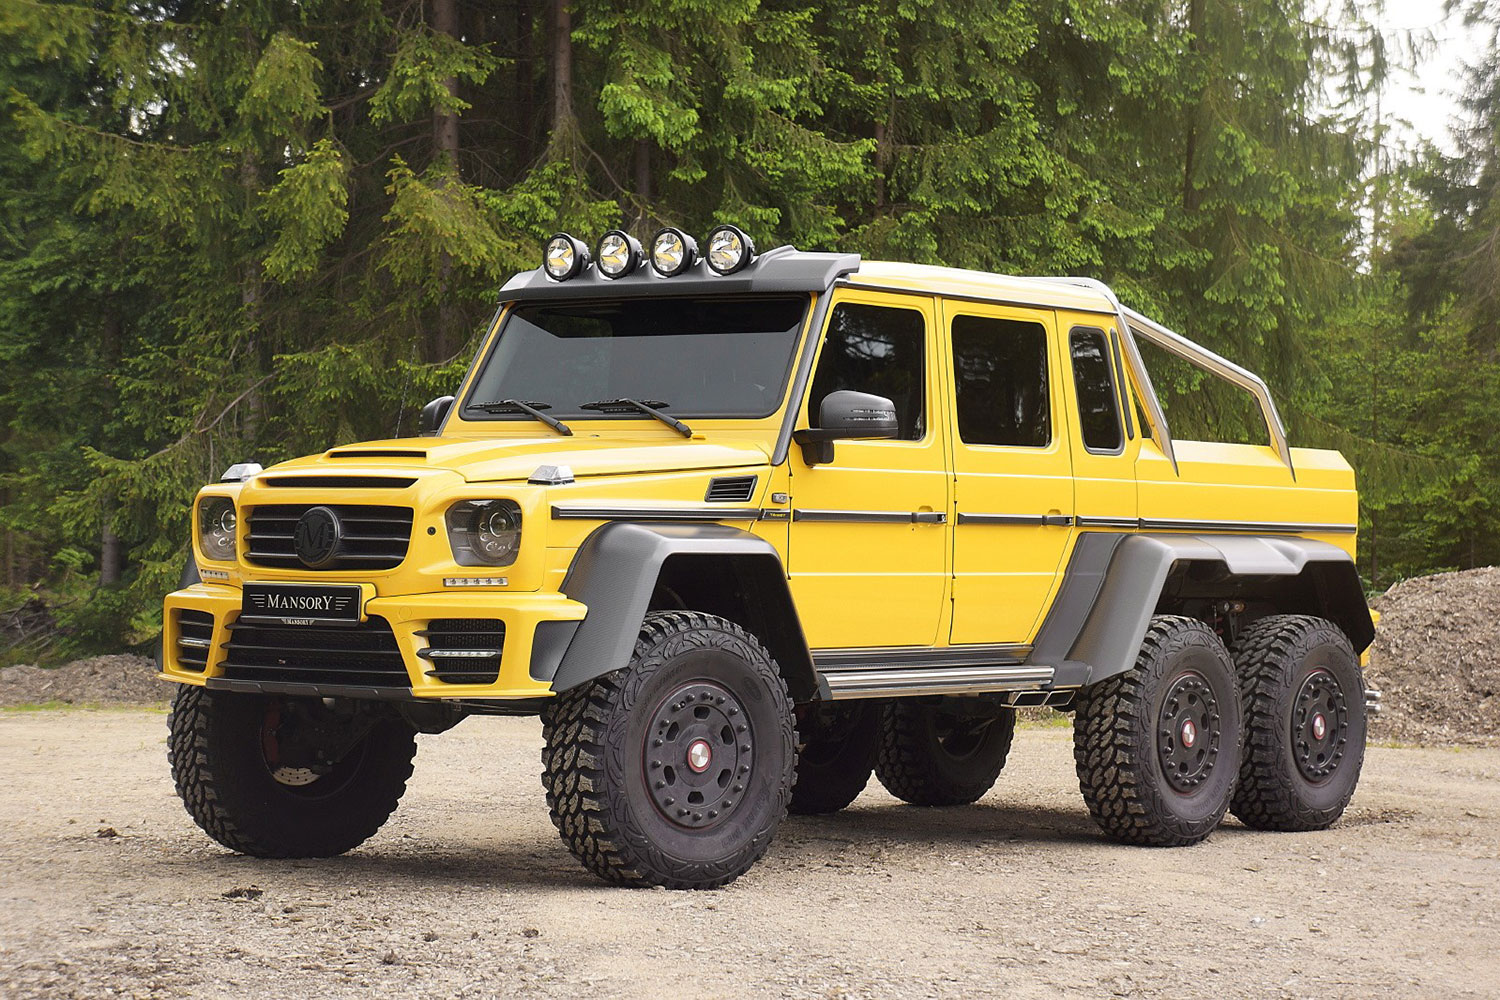 mansory-mercedes-benz-amg-6x6-off-road-vehicle-01